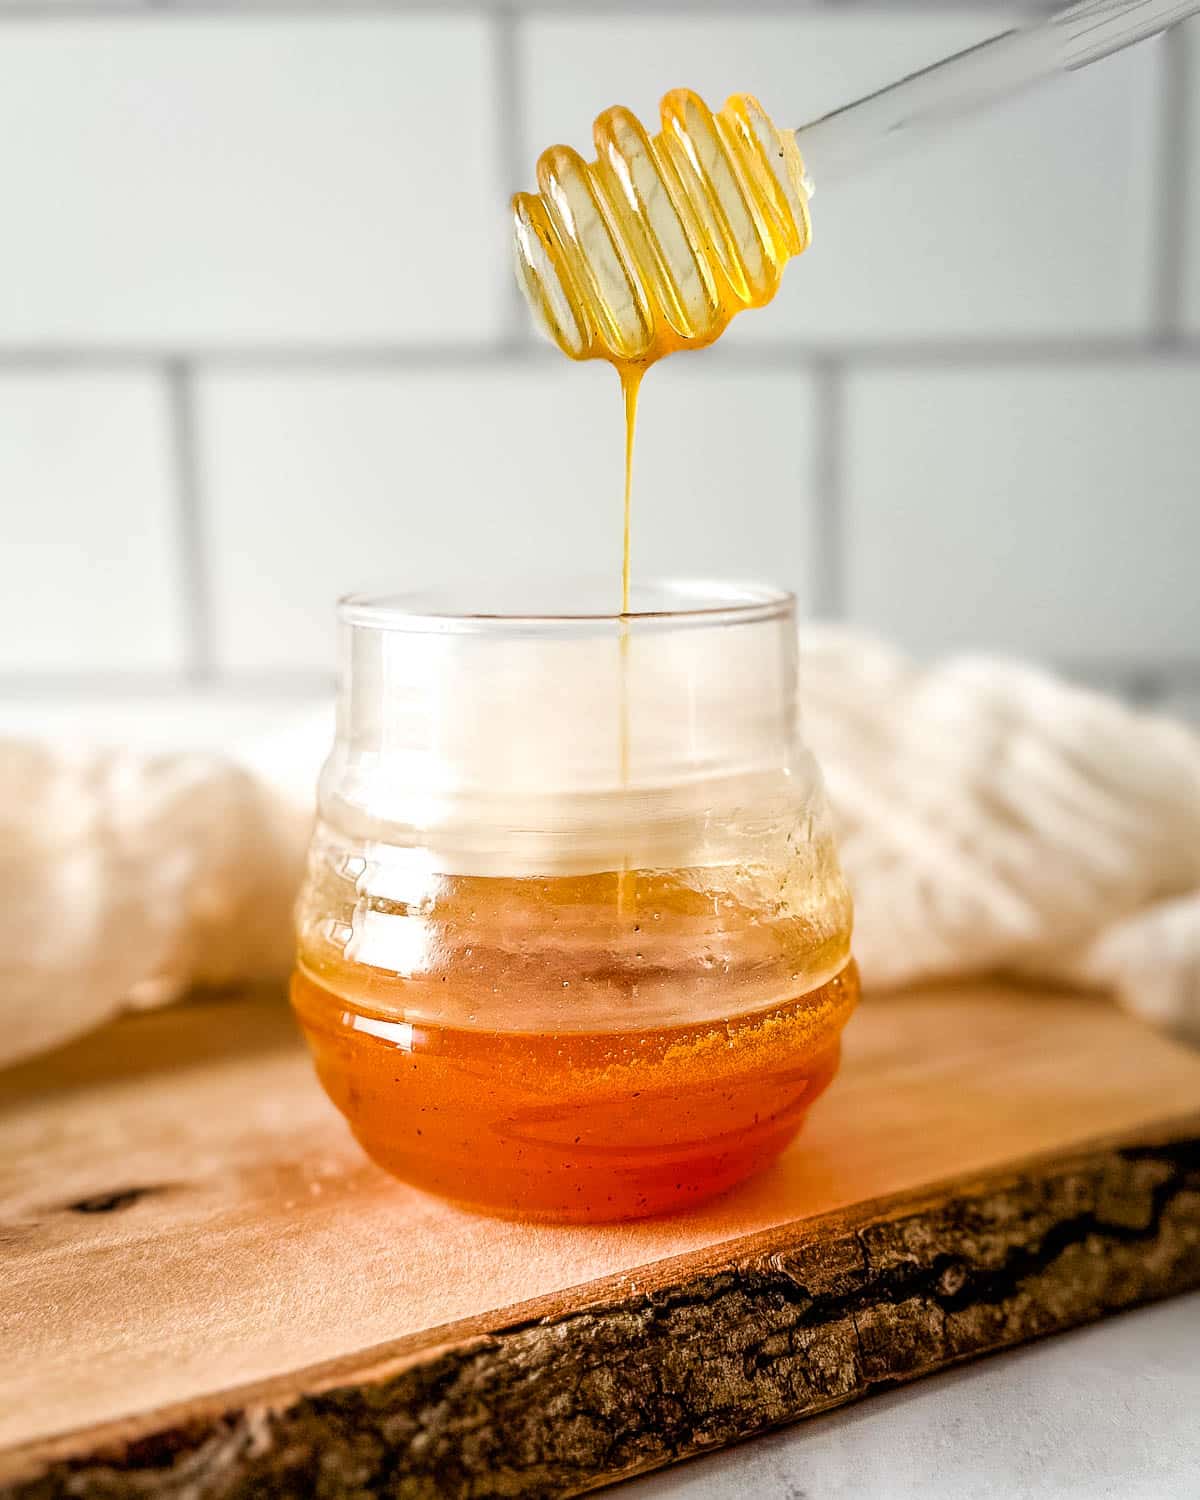 Hot honey sauce is drizzled into a glass jar with a glass honey dipper.